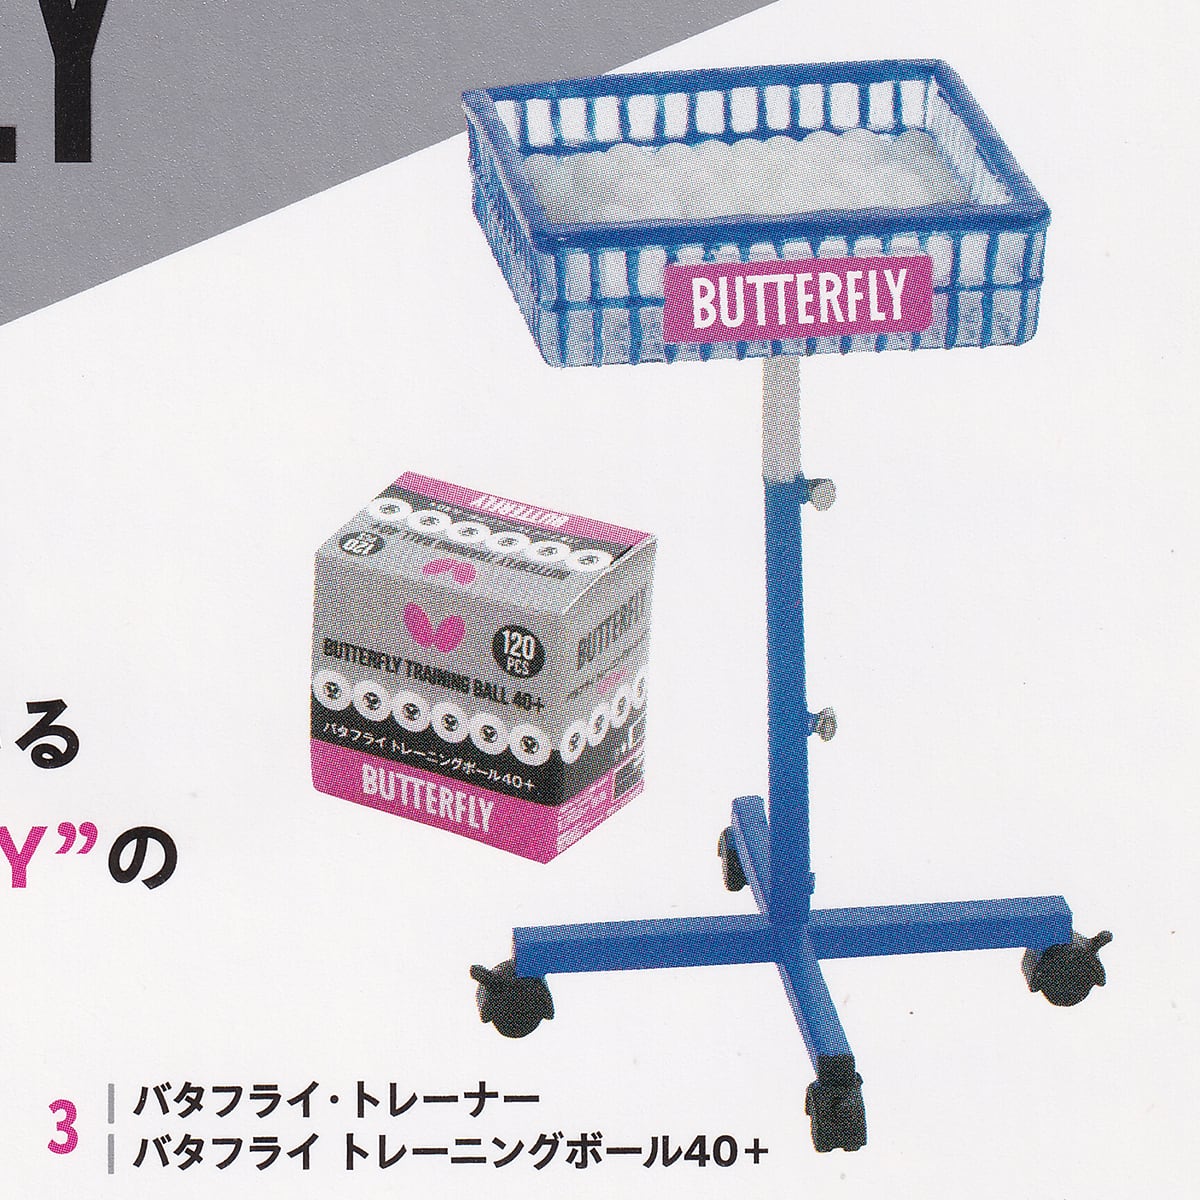 BUTTERFLY miniature collection ケンエレファント 【全4種フルコンプセット】 卓球 バタフライ ミニチュア グッズ  フィギュア おもちゃ ガチャガチャ 【即納 在庫品】【数量限定】【セール品】